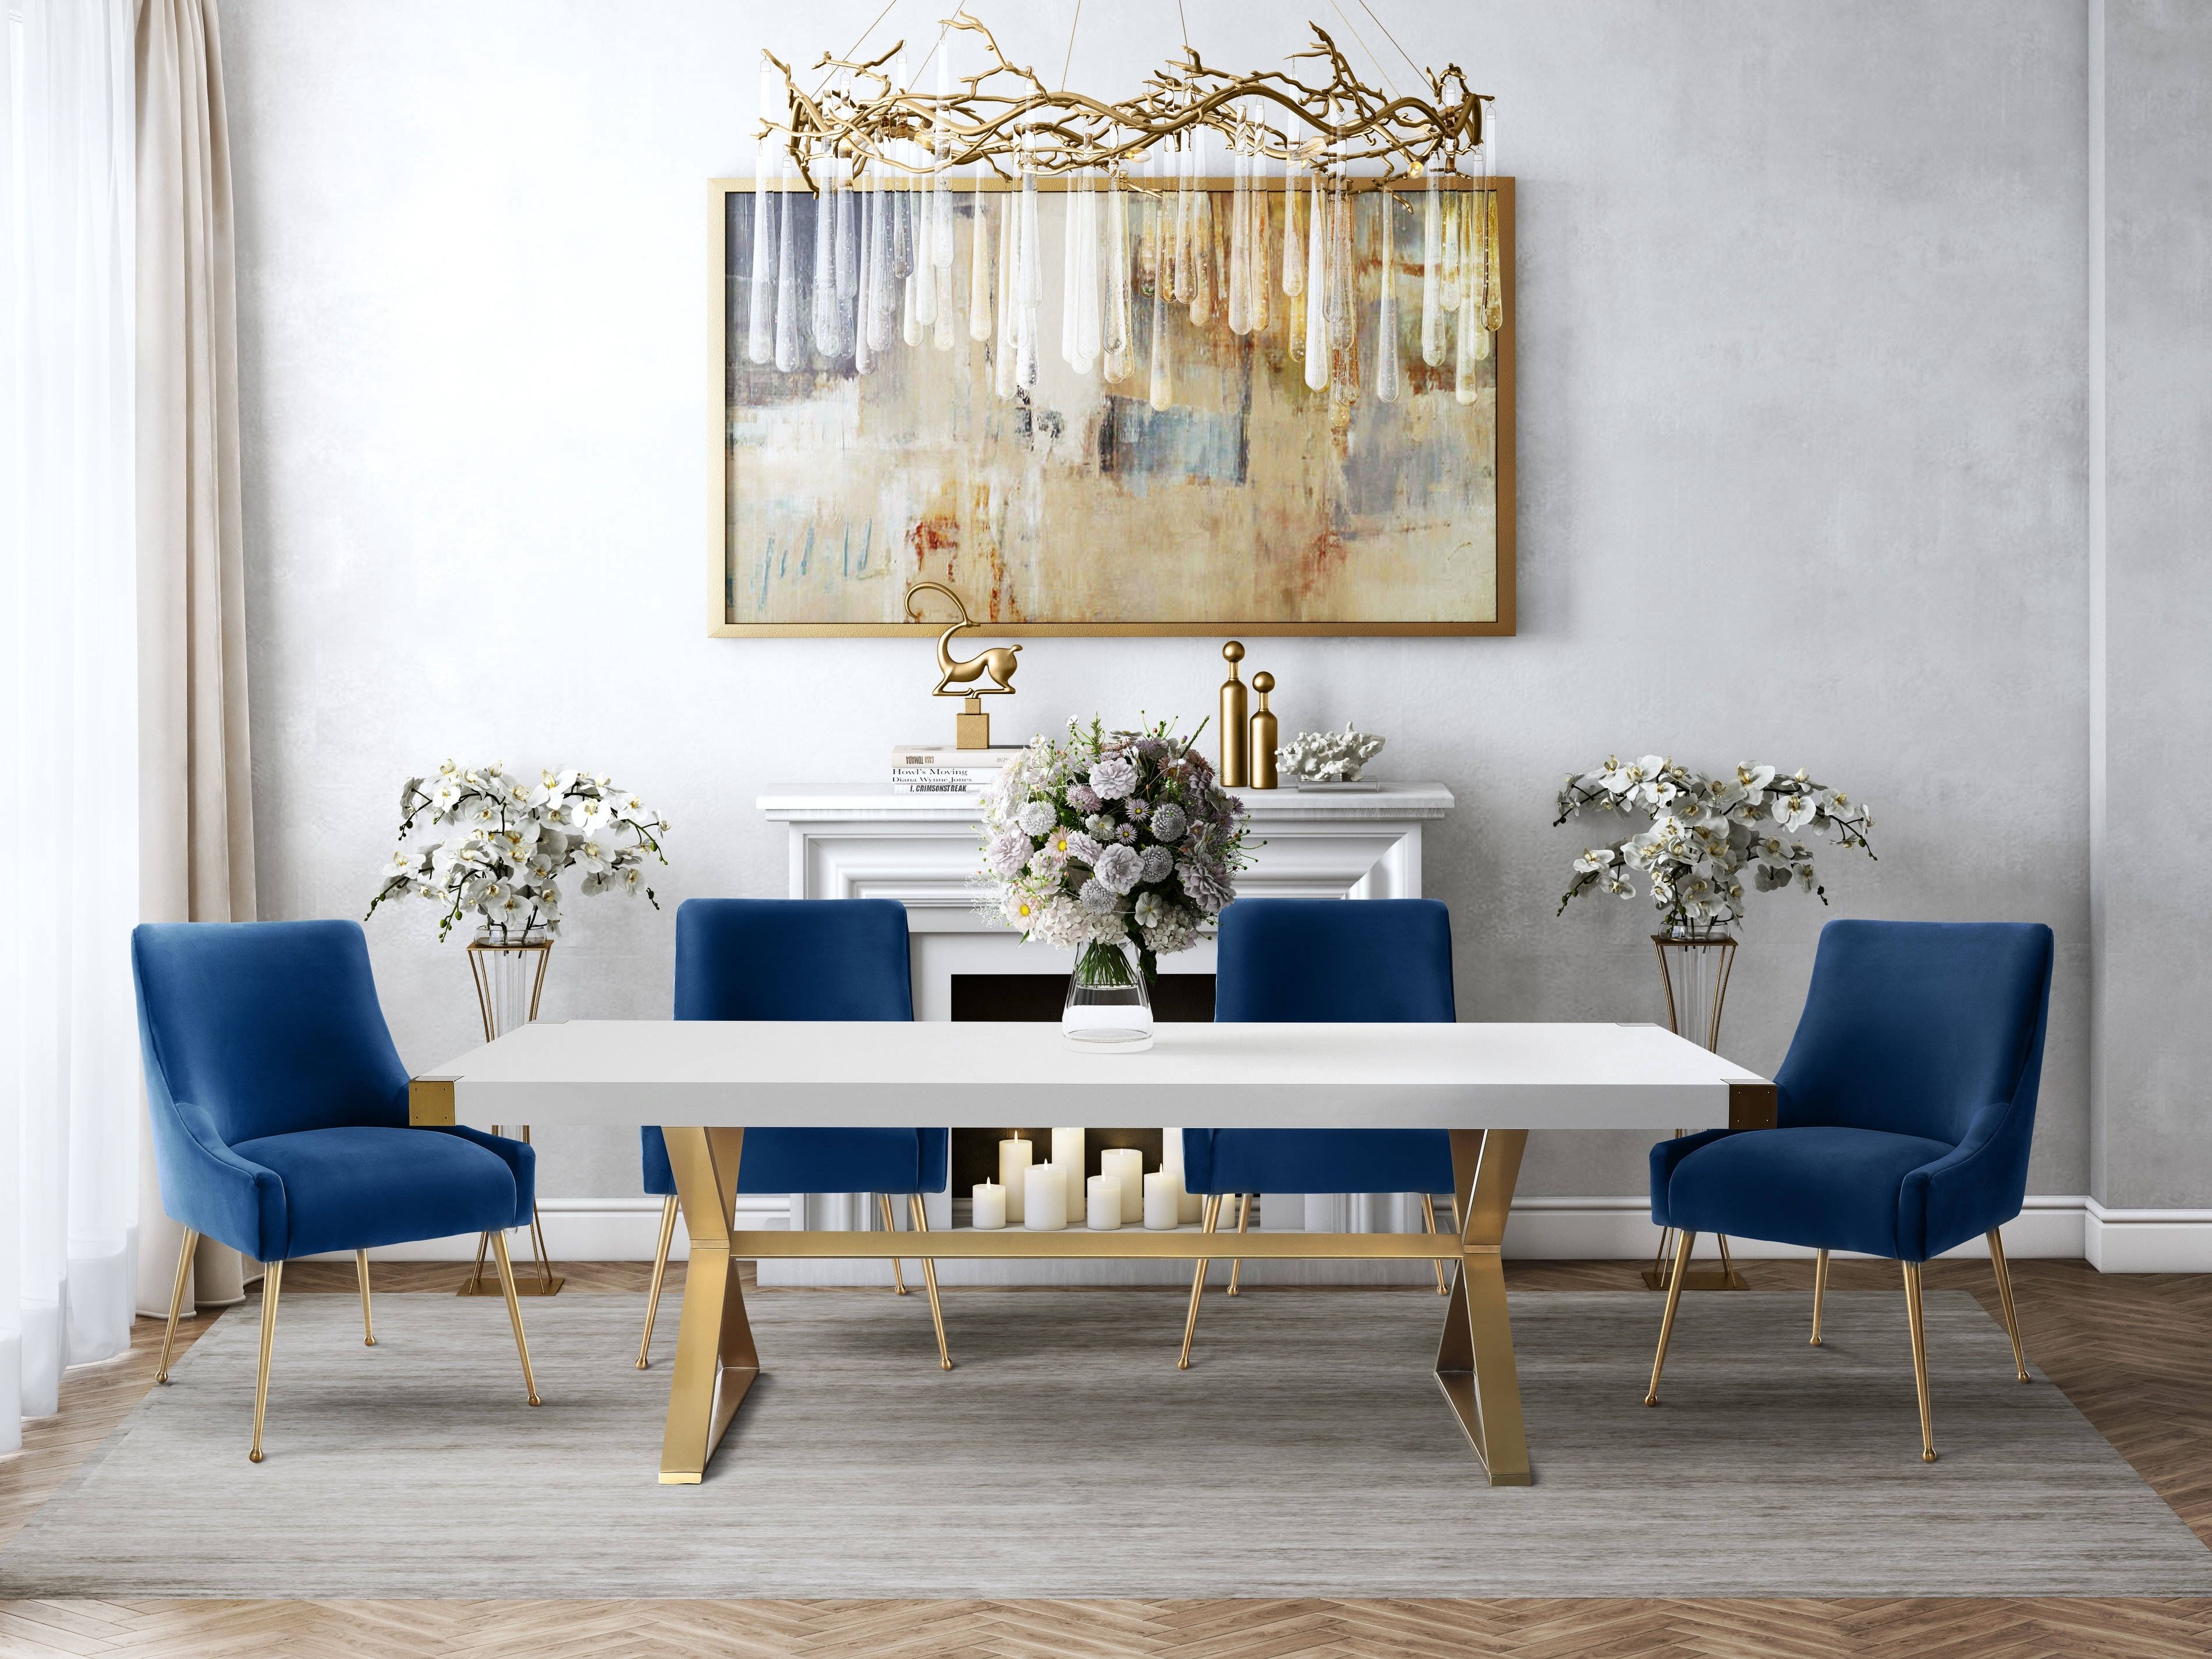 Tov Furniture Adeline 5pc Dining Room Set With Navy Chairs | The With Adeline 3 Piece Sectionals (View 16 of 30)